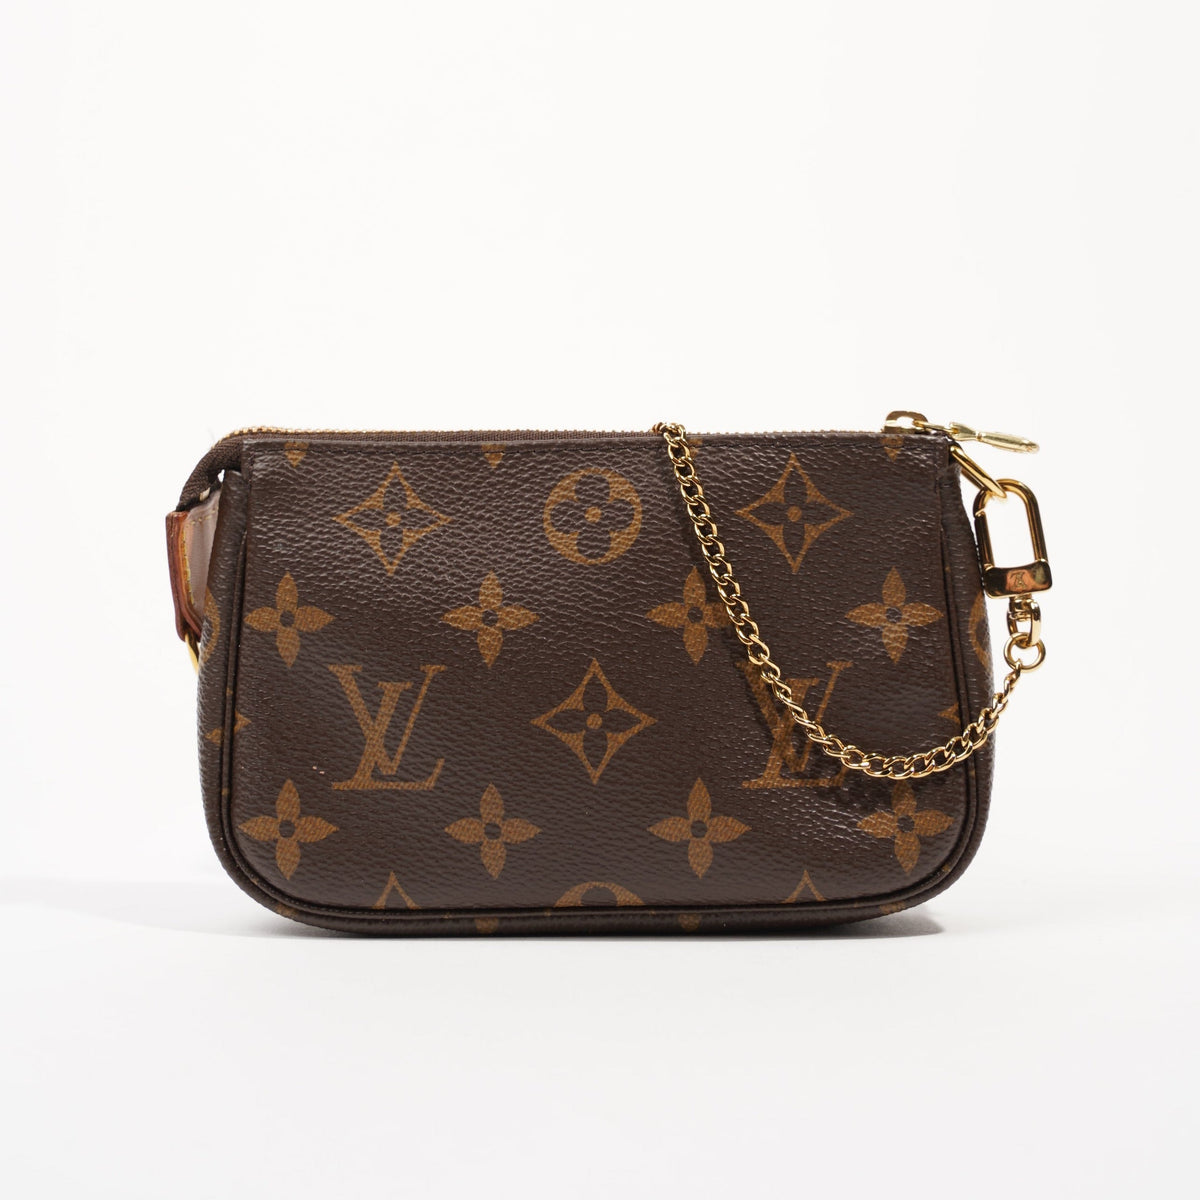 Updated LV Pochette Accessoires with a chain